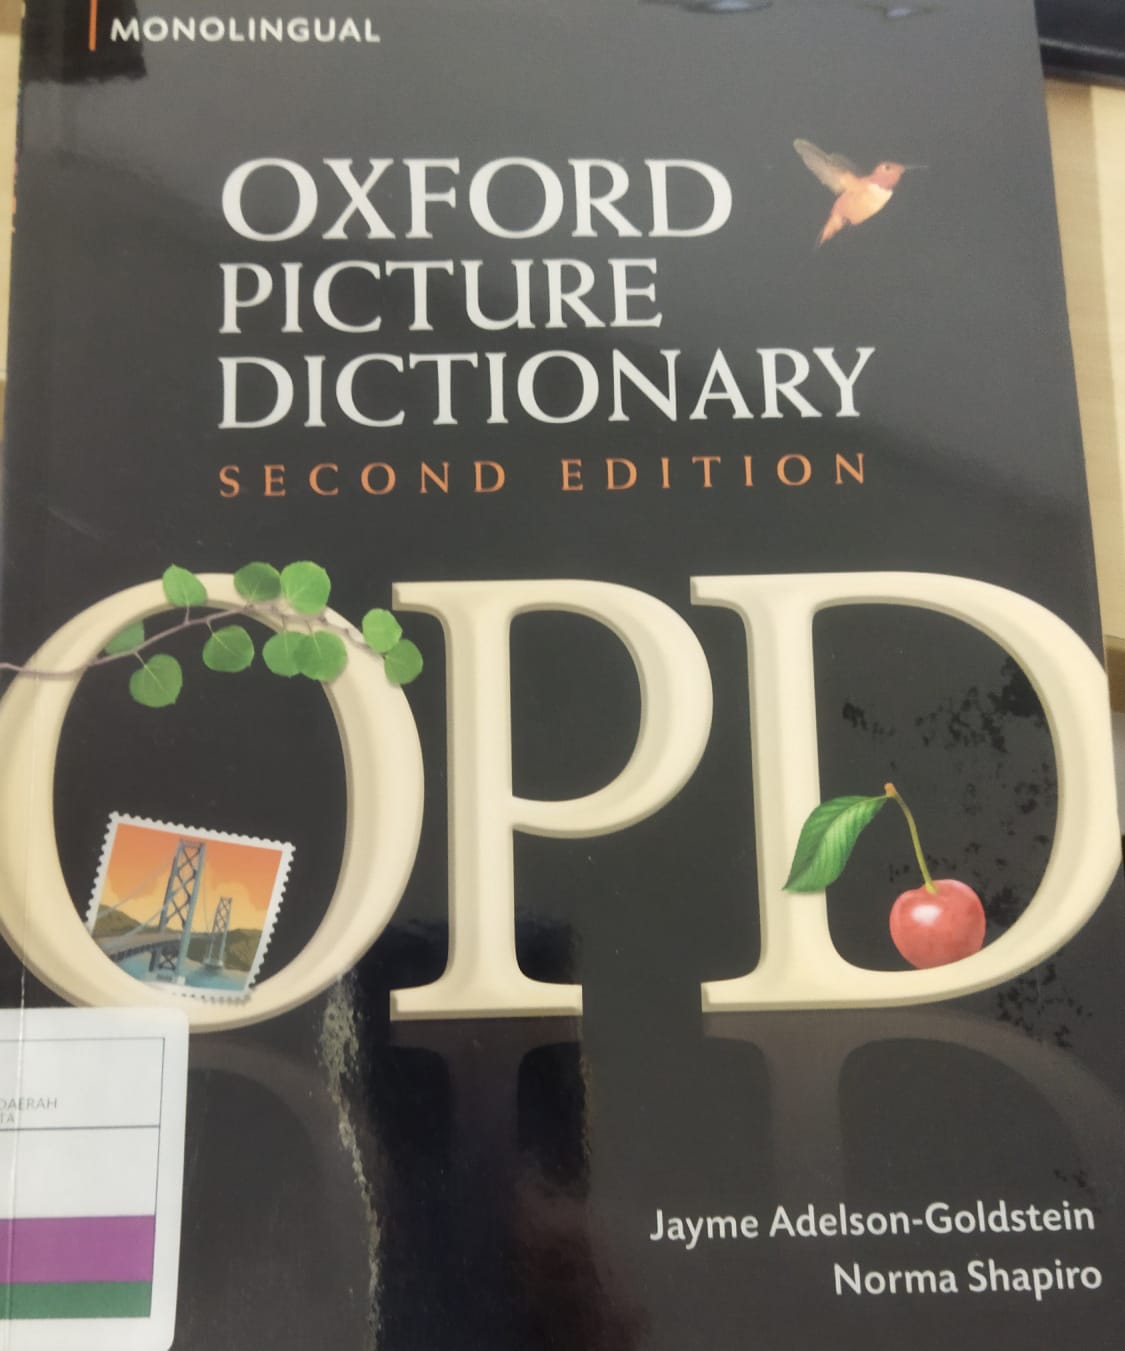 Oxford picture dictionary : monolingual